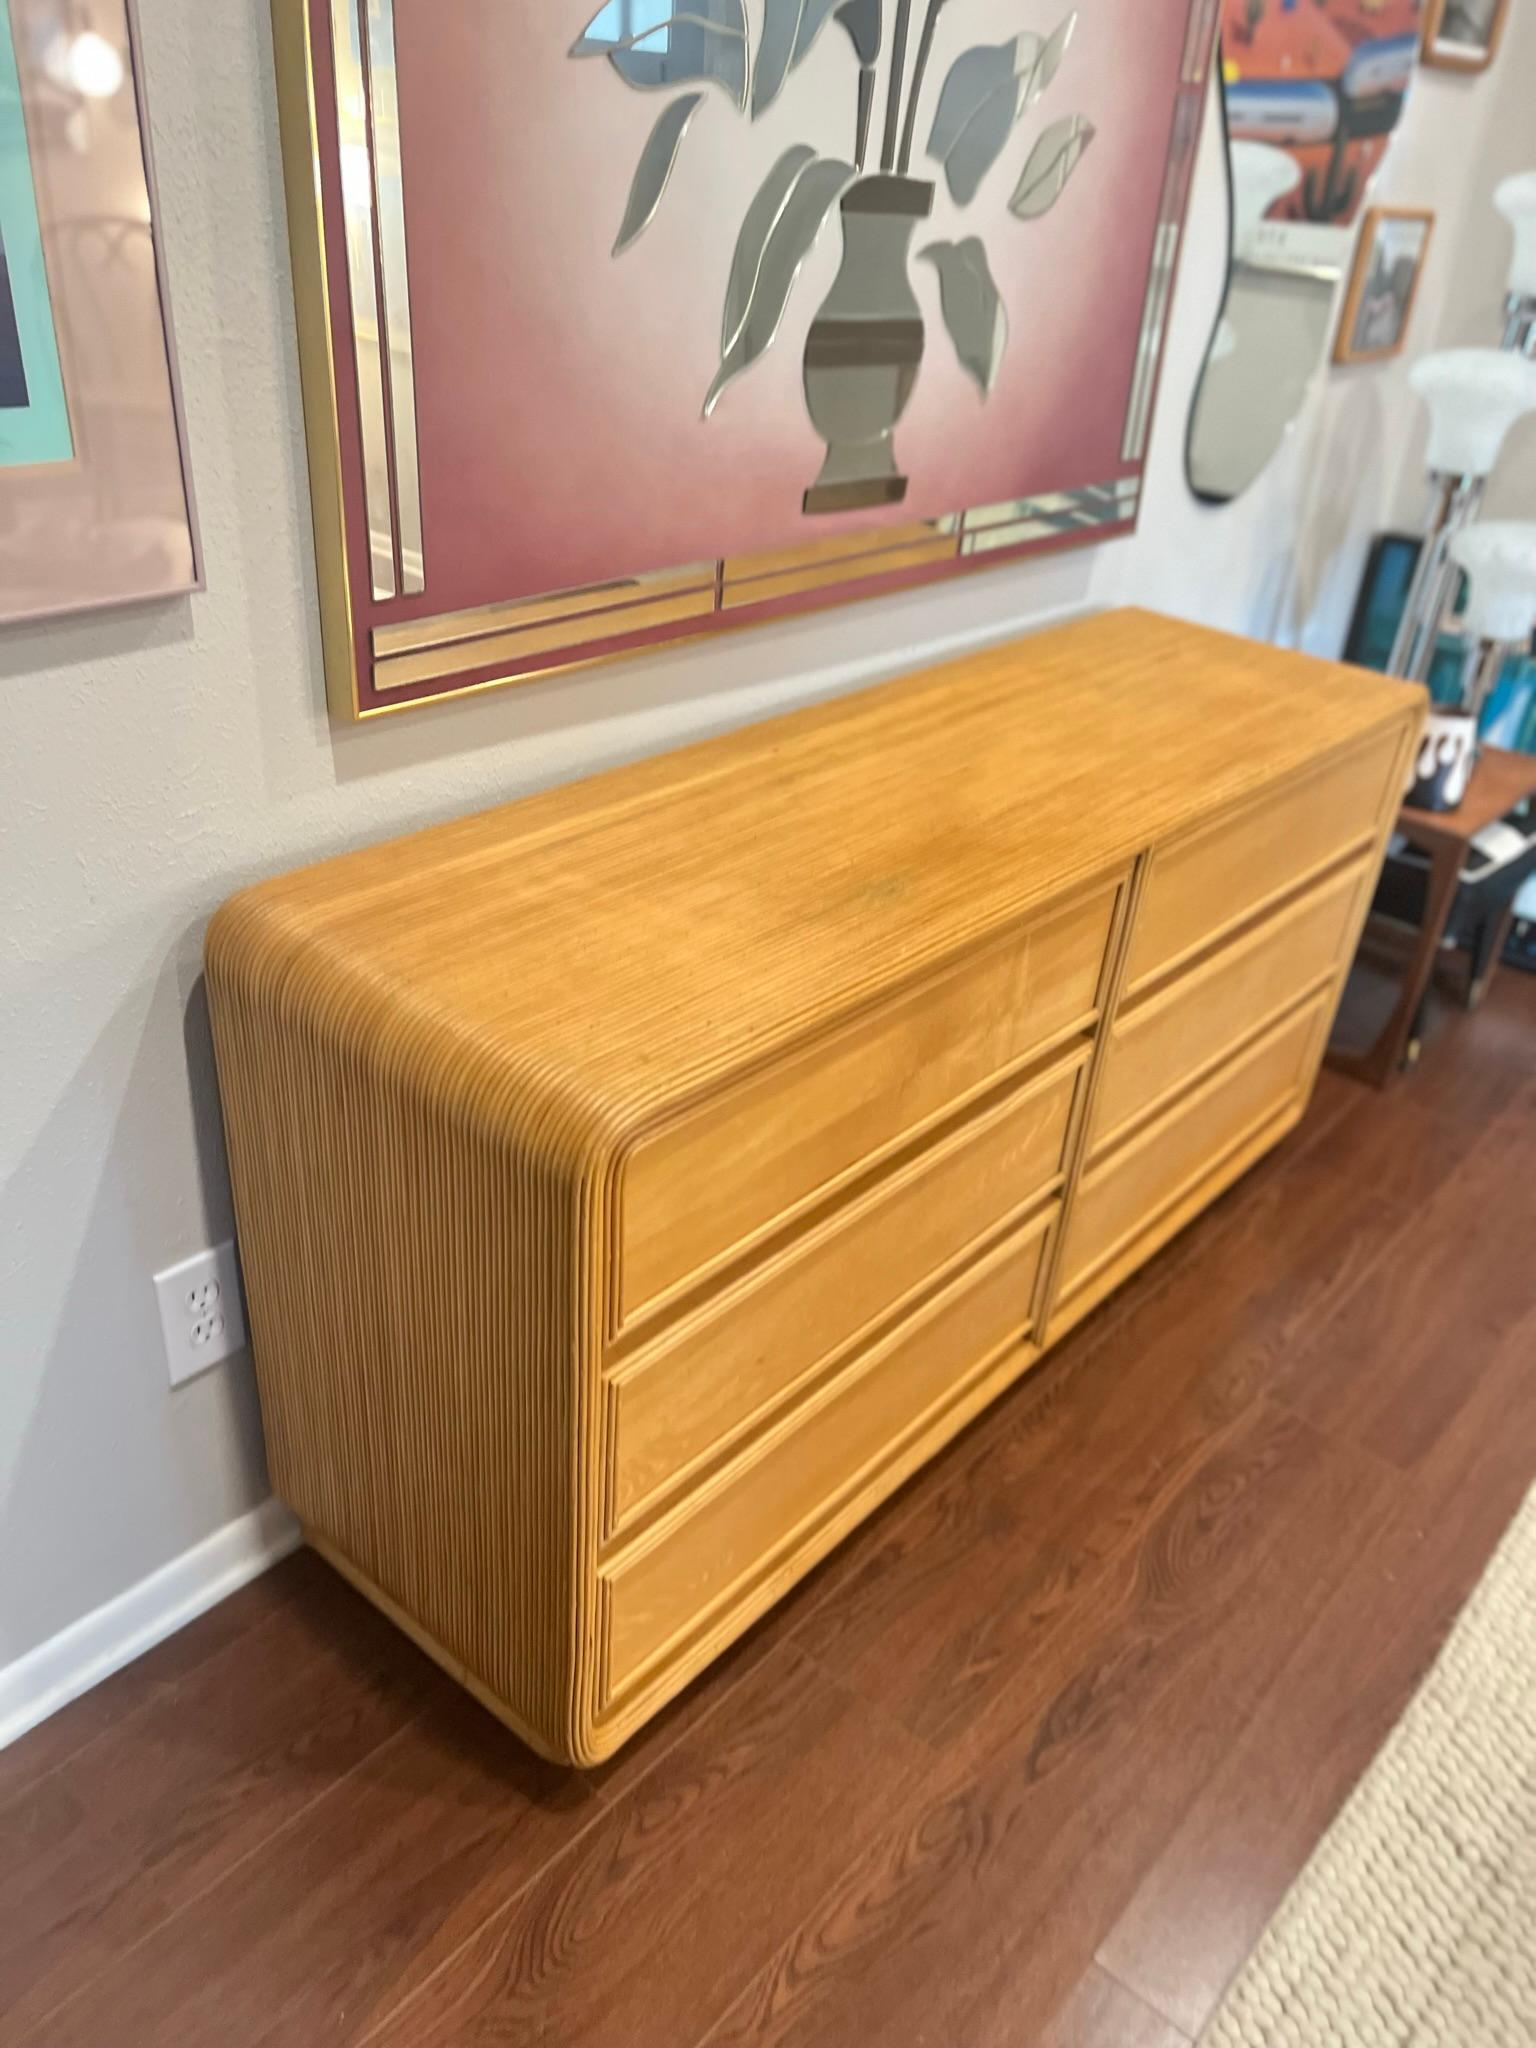 Vintage Mid-Century Modern 6 Drawer Pencil Reed Dresser Gabriella Crespi Style In Good Condition For Sale In Houston, TX